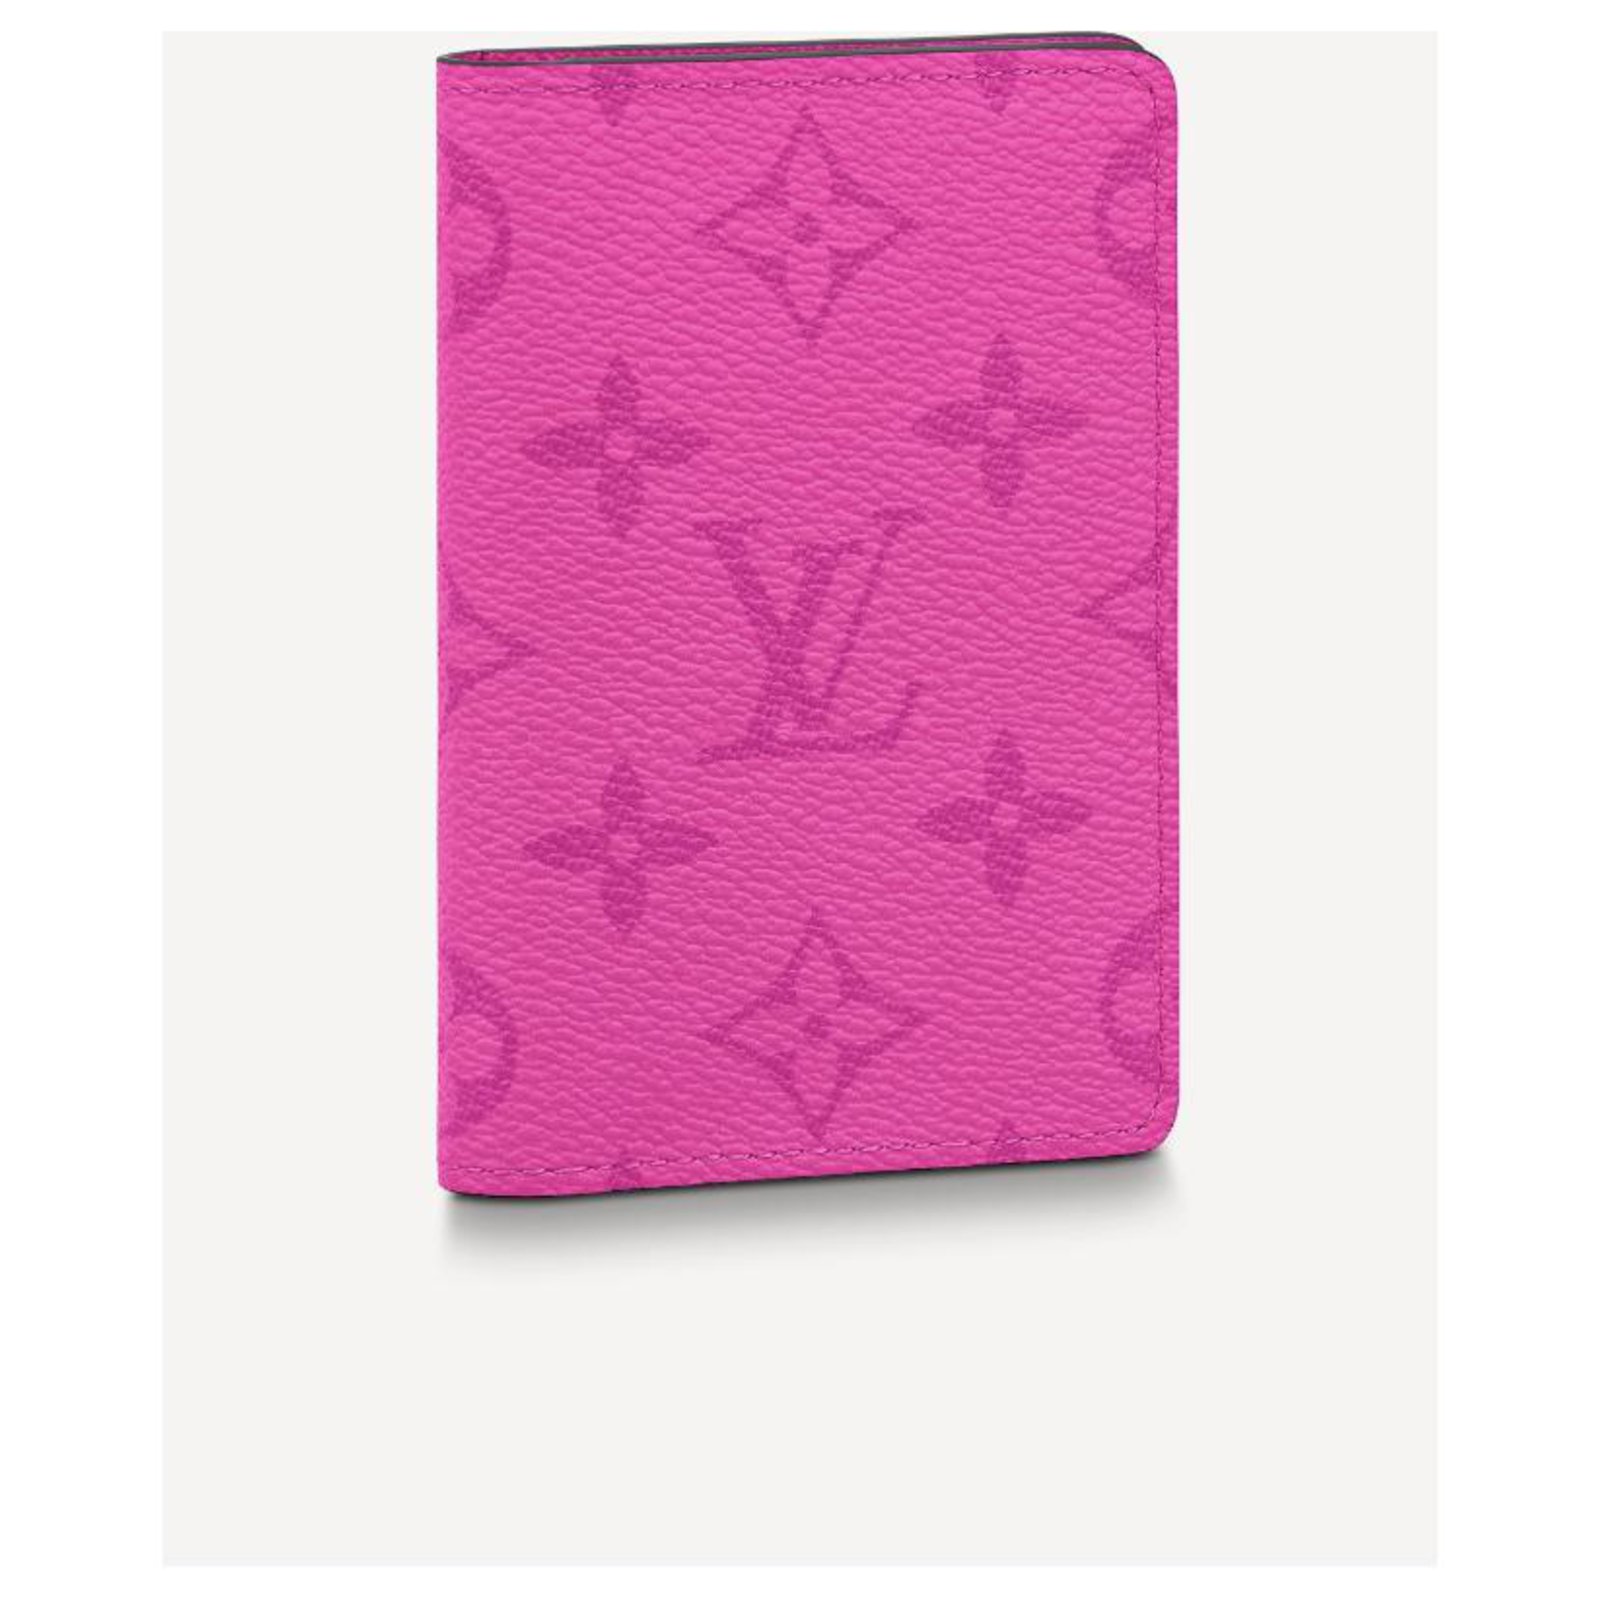 green and pink louis vuittons wallet